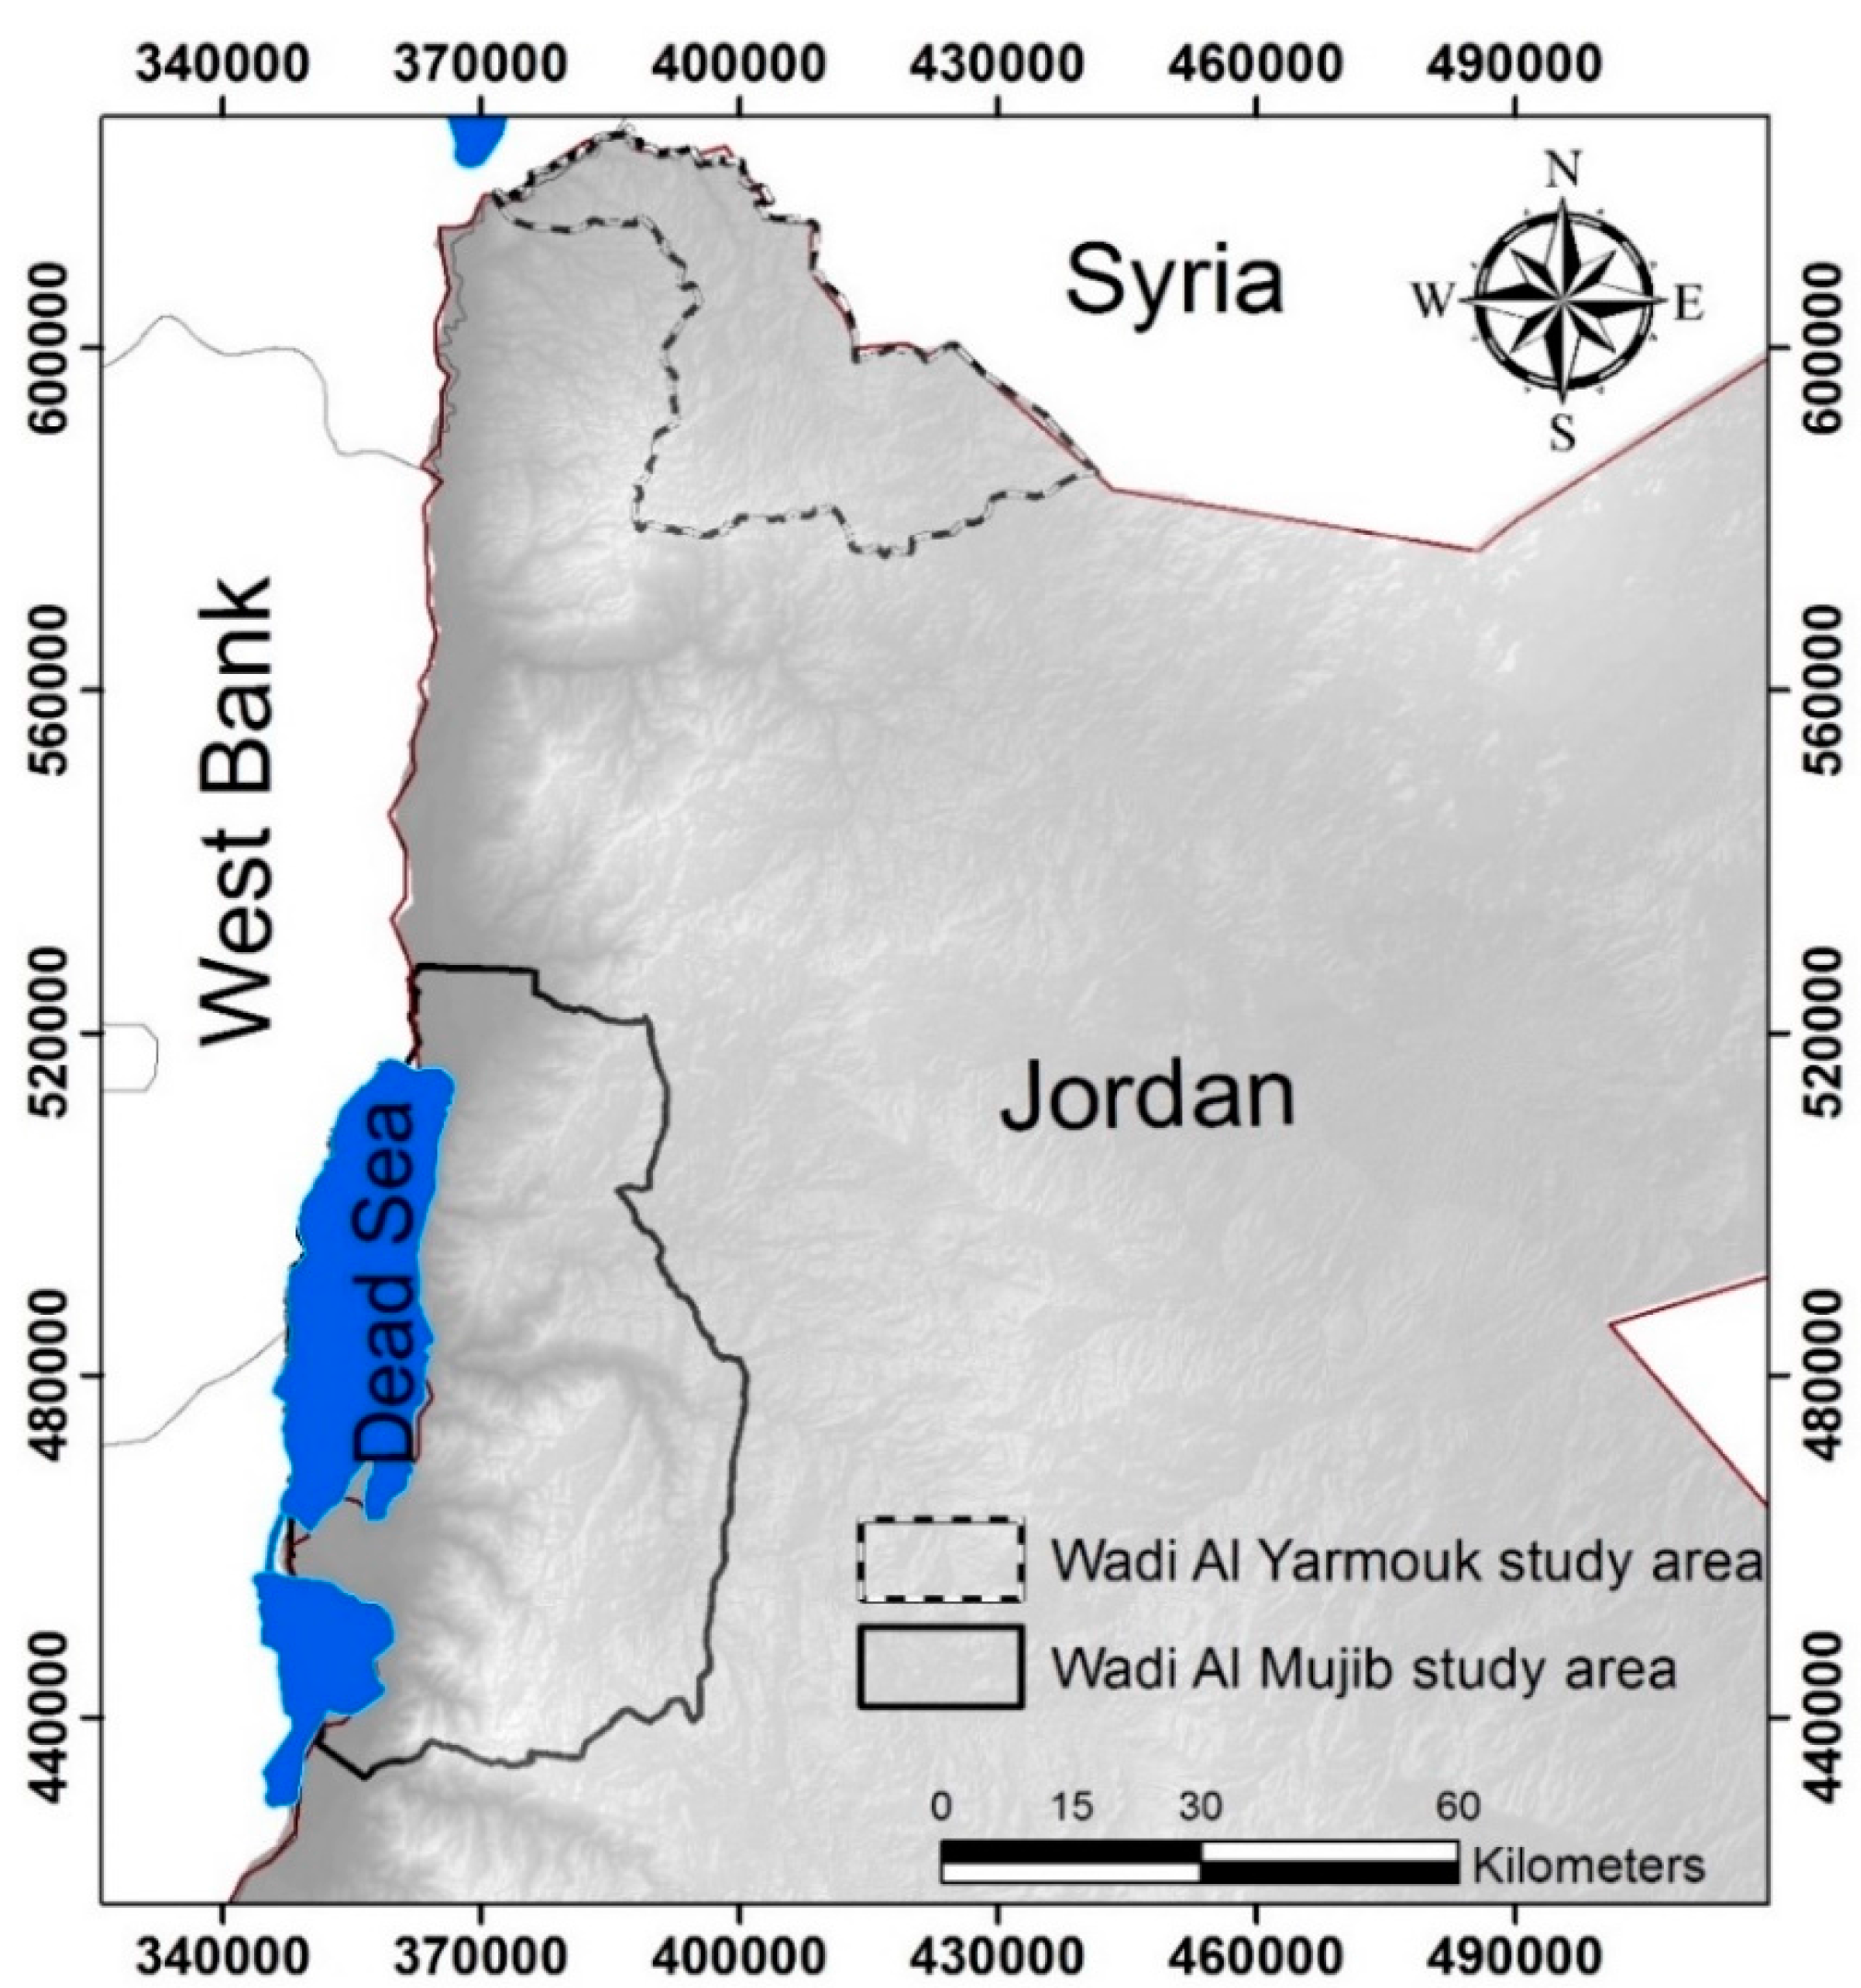 Land | Free Full-Text | The Influence of Geology on Landscape Typology in Jordan: Understanding and Planning Implications | HTML